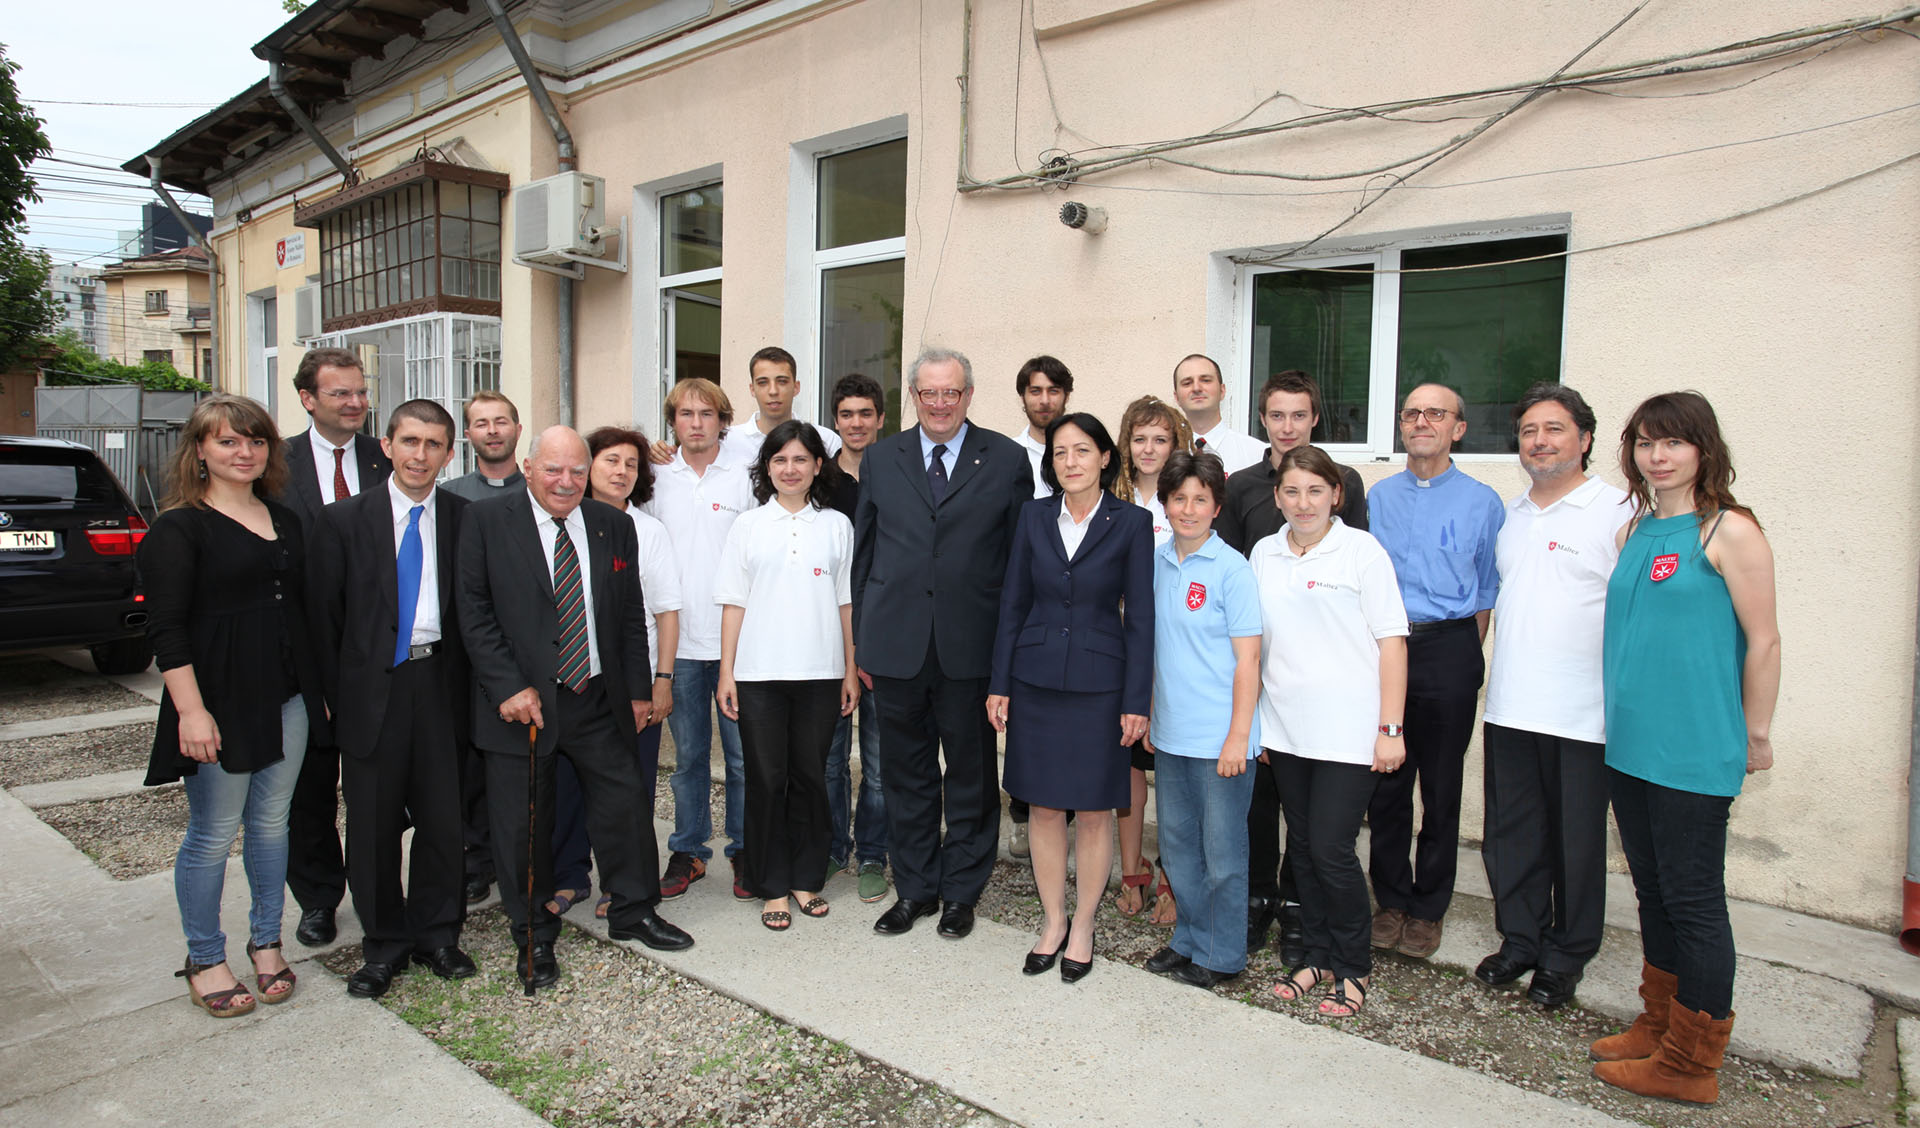 The Grand Master with the Order’s volunteers in Romania